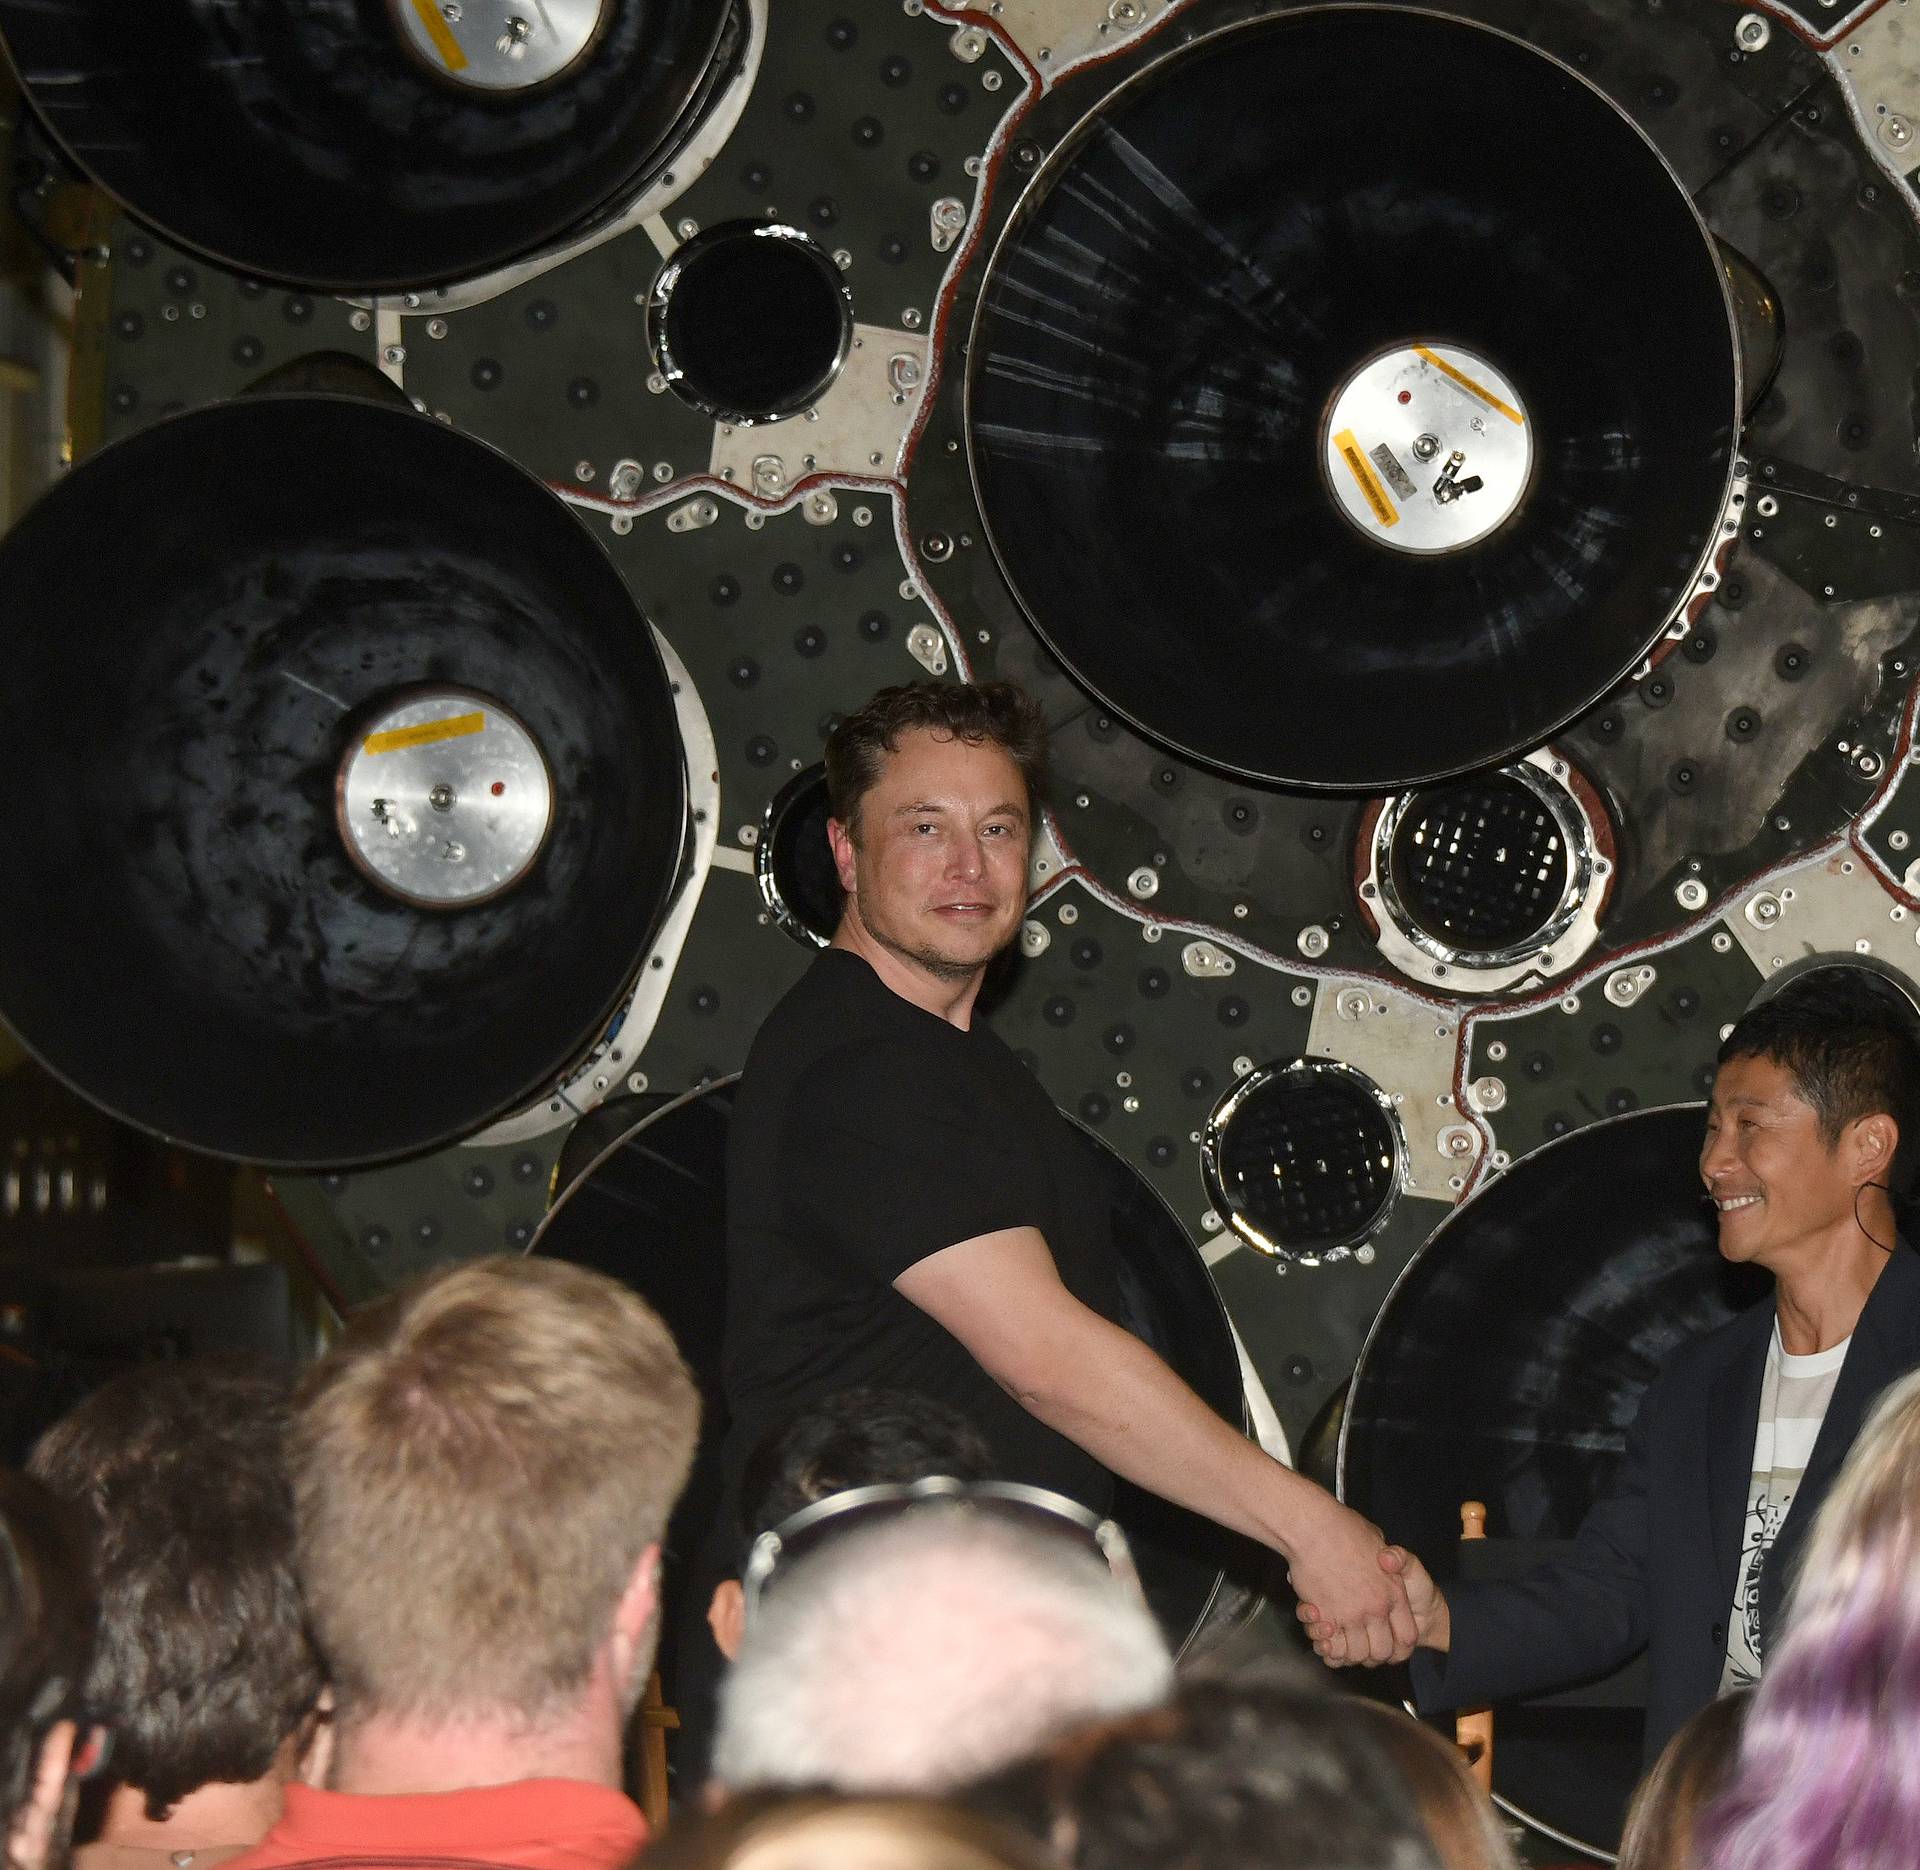 SpaceX CEO Elon Musk shakes hands with Japanese billionaire Yusaku Maezawa during a press conference about being the first SpaceX private passenger to circle the moon aboard SpaceXâs BFR launch vehicle, at the company's headquarters in Hawthorne